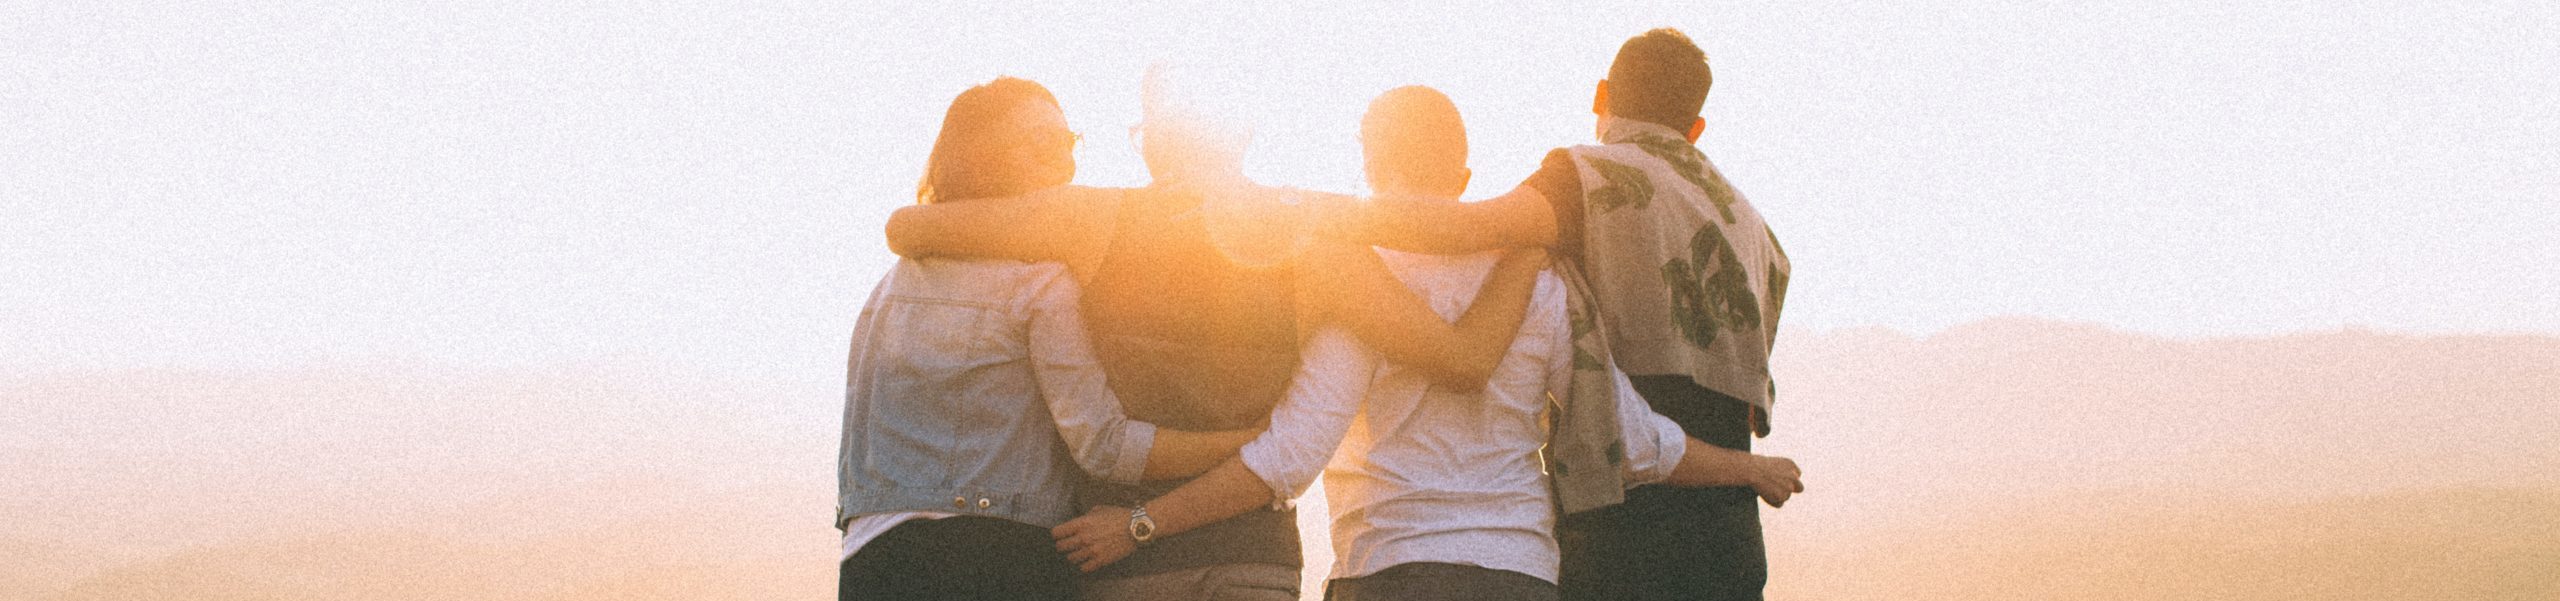 Four people with their backs facing the camera and their arms around each other at sunset.